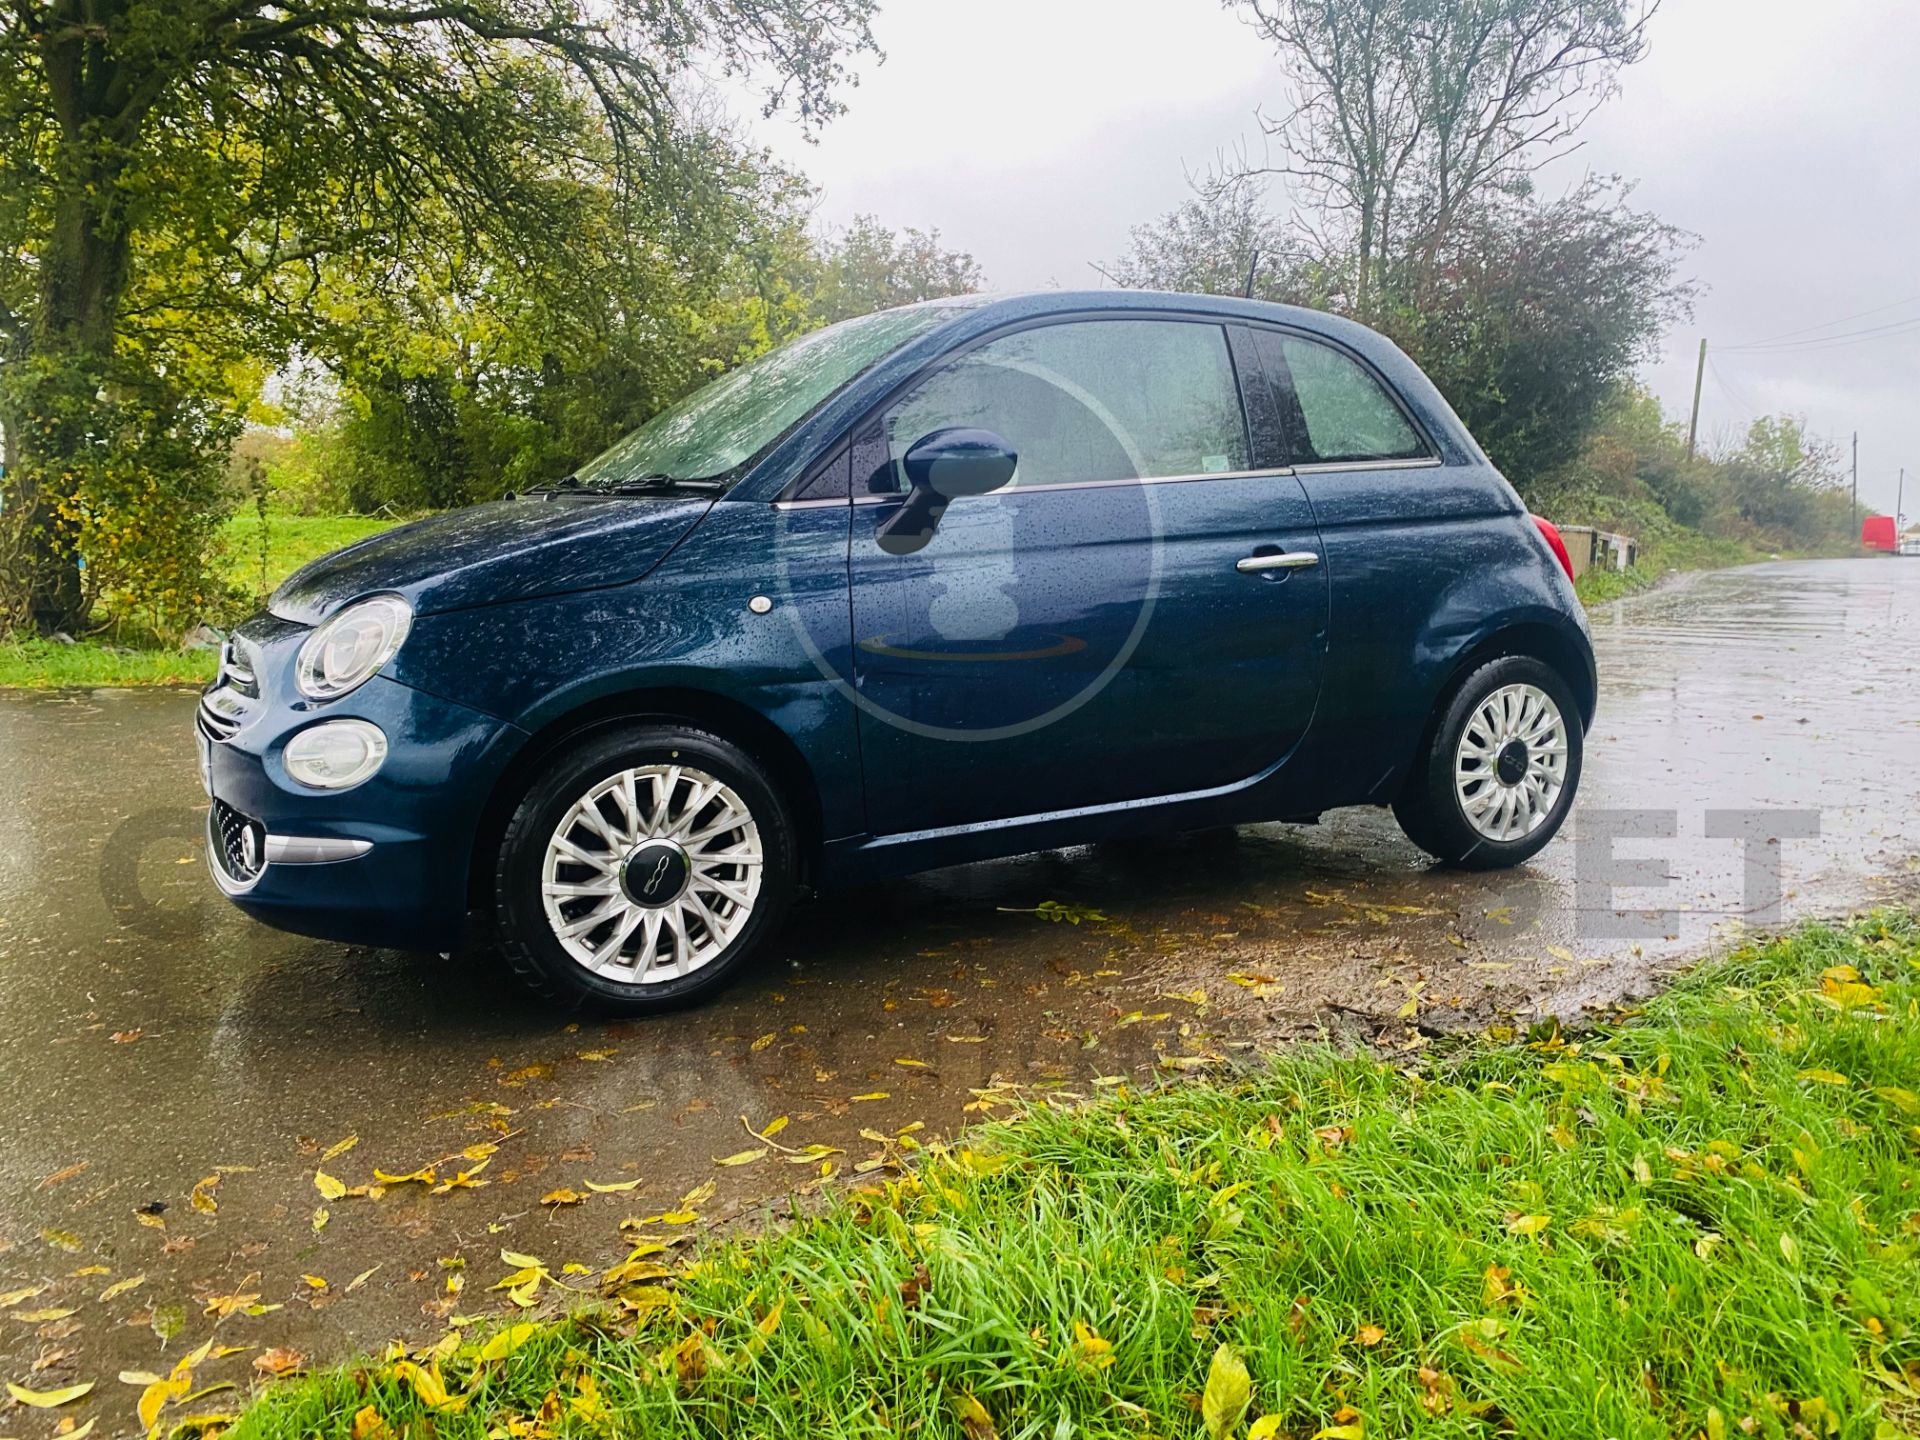 (ON SALE) FIAT 500 LOUNGE 1.3 PETROL STOP/START EURO 6 *AIRCON AND SAT NAV* ONLY 37k MILES-NO VAT!!!